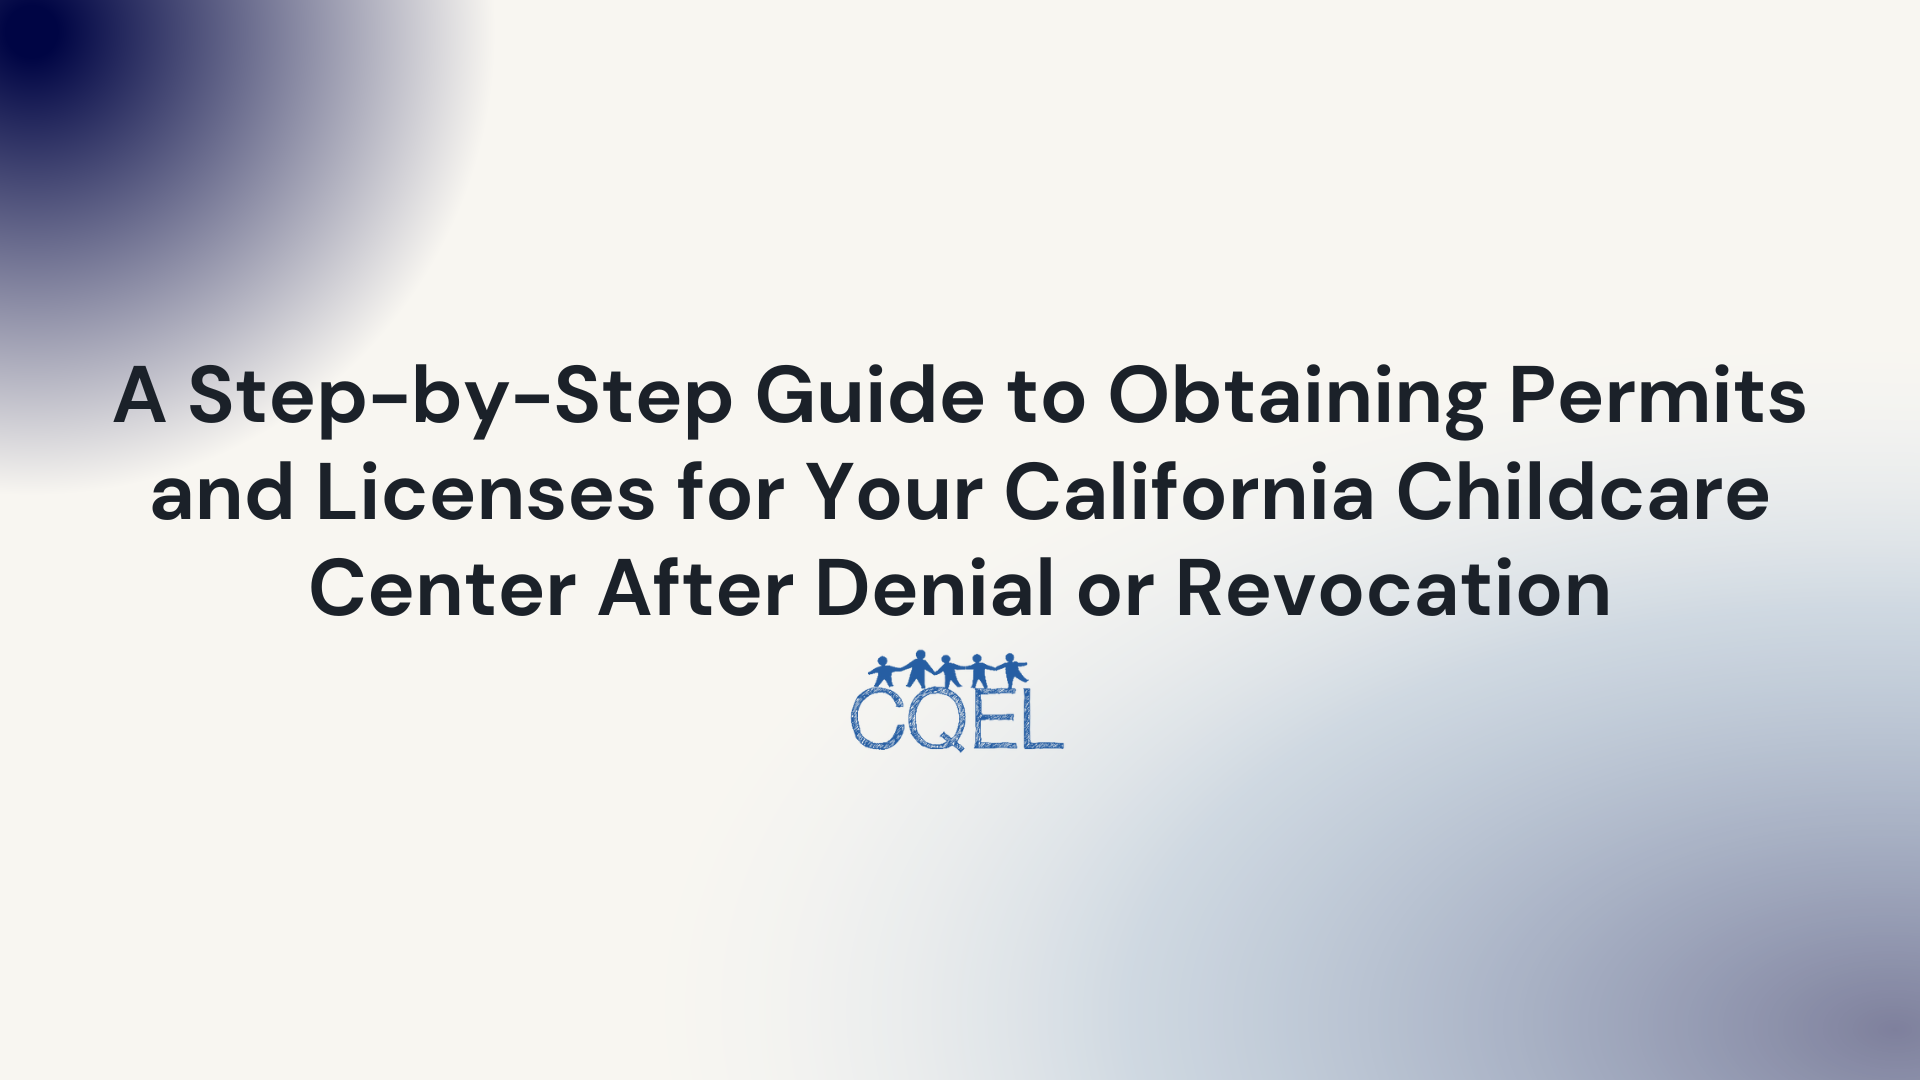 A Step-by-Step Guide to Obtaining Permits and Licenses for Your California Childcare Center After Denial or Revocation